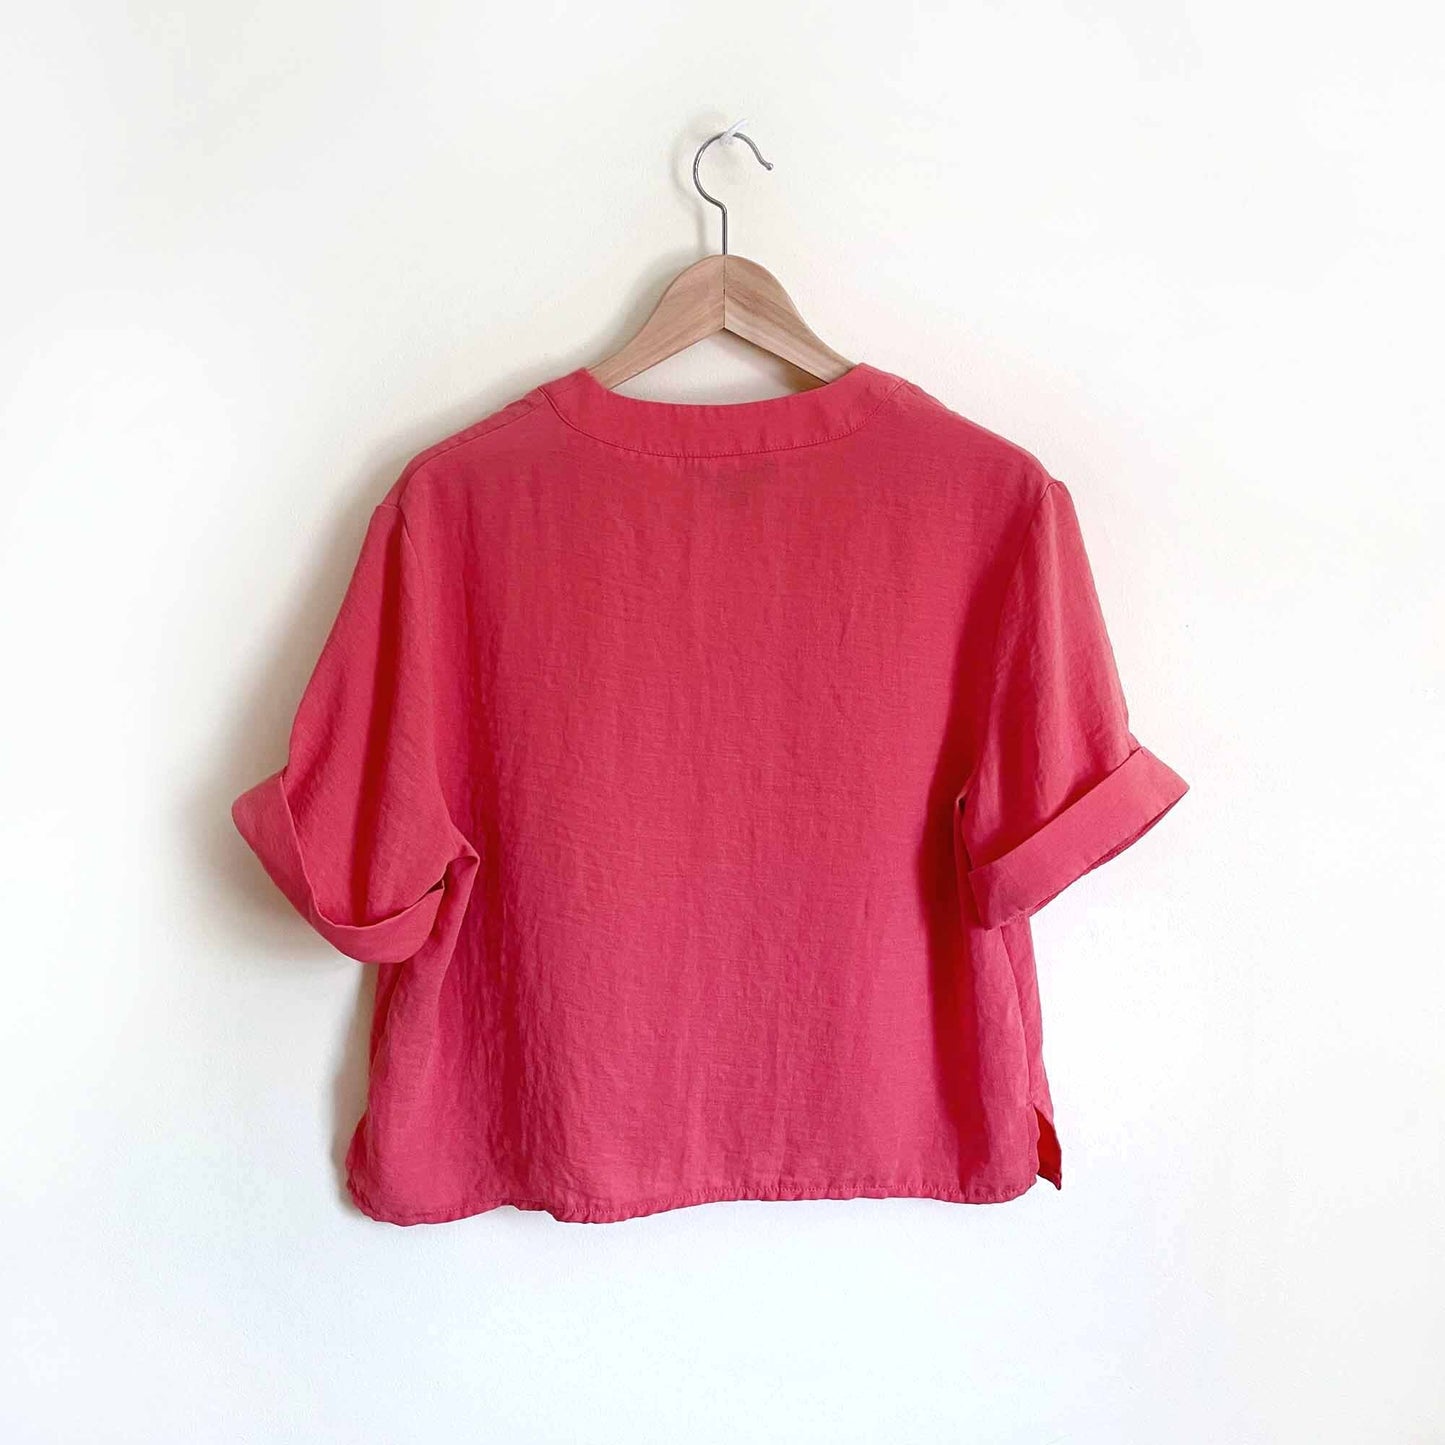 george rolled short sleeve v-neck coral button down - size medium